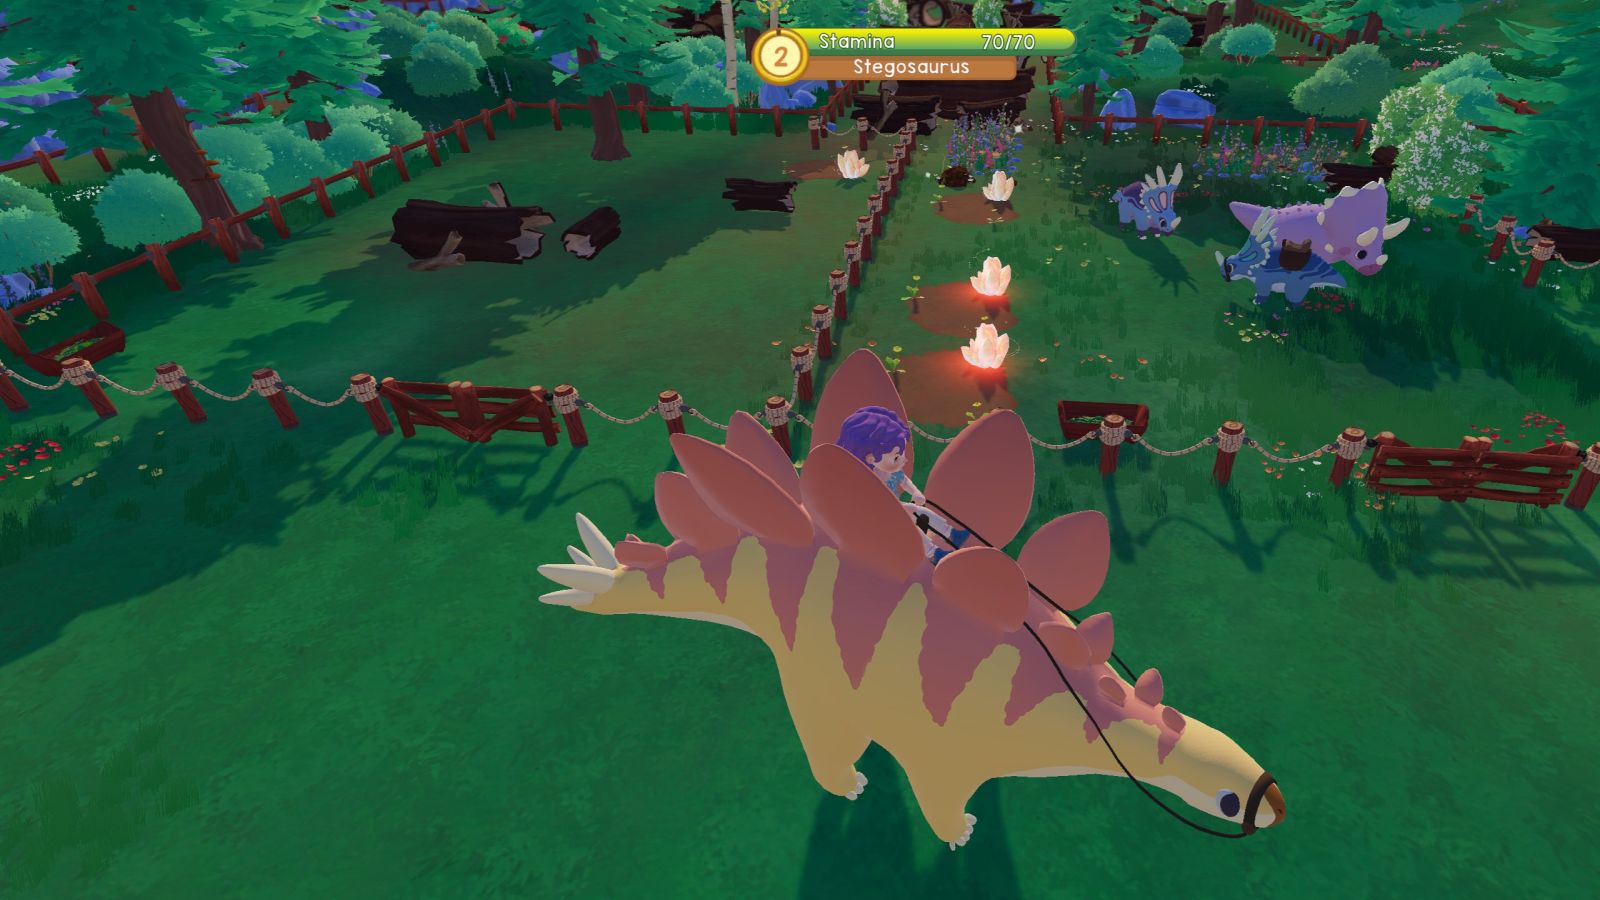 Paleo Pines. A fun dinosaur game were you can befriend, tame and build a  ranch full of dinosaurs. Said to release in September for Nintendo Switch,  PS4, PS5, PC and Xbox. What